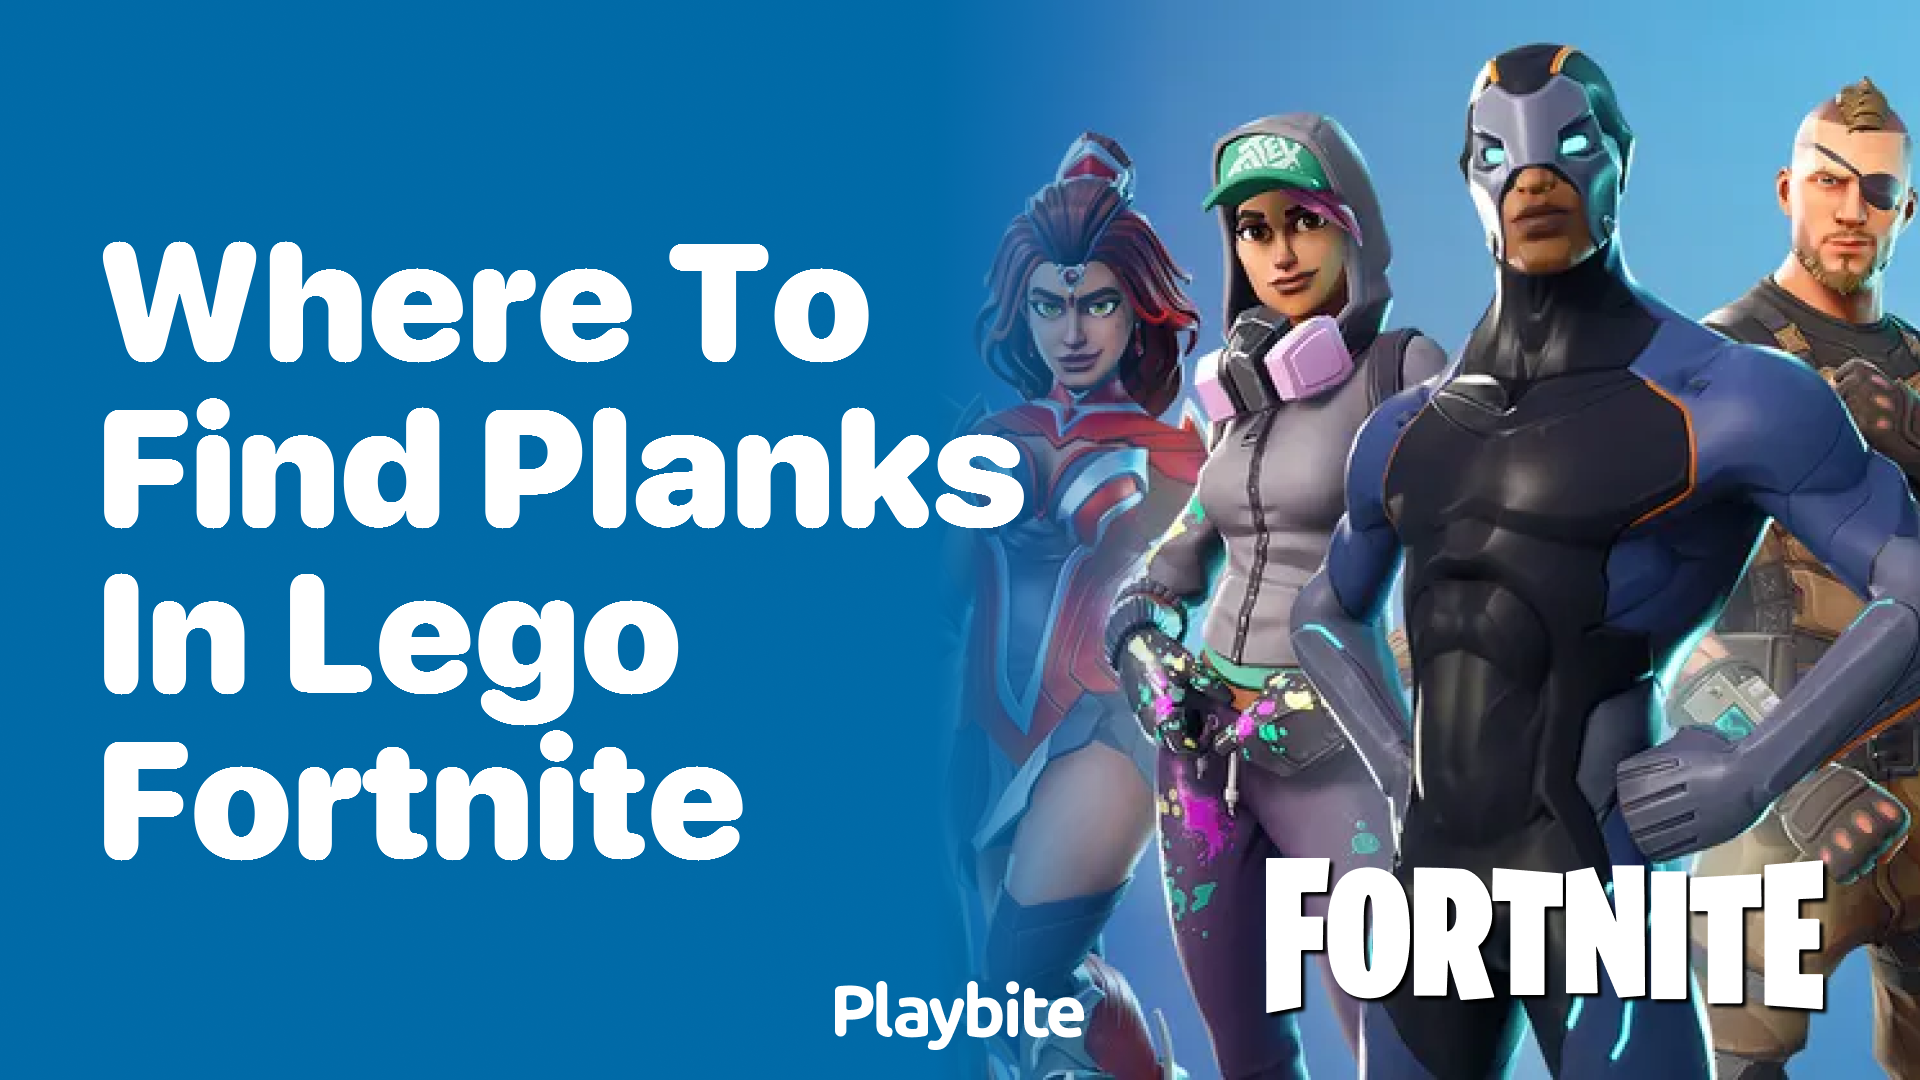 Where to Find Planks in Lego Fortnite